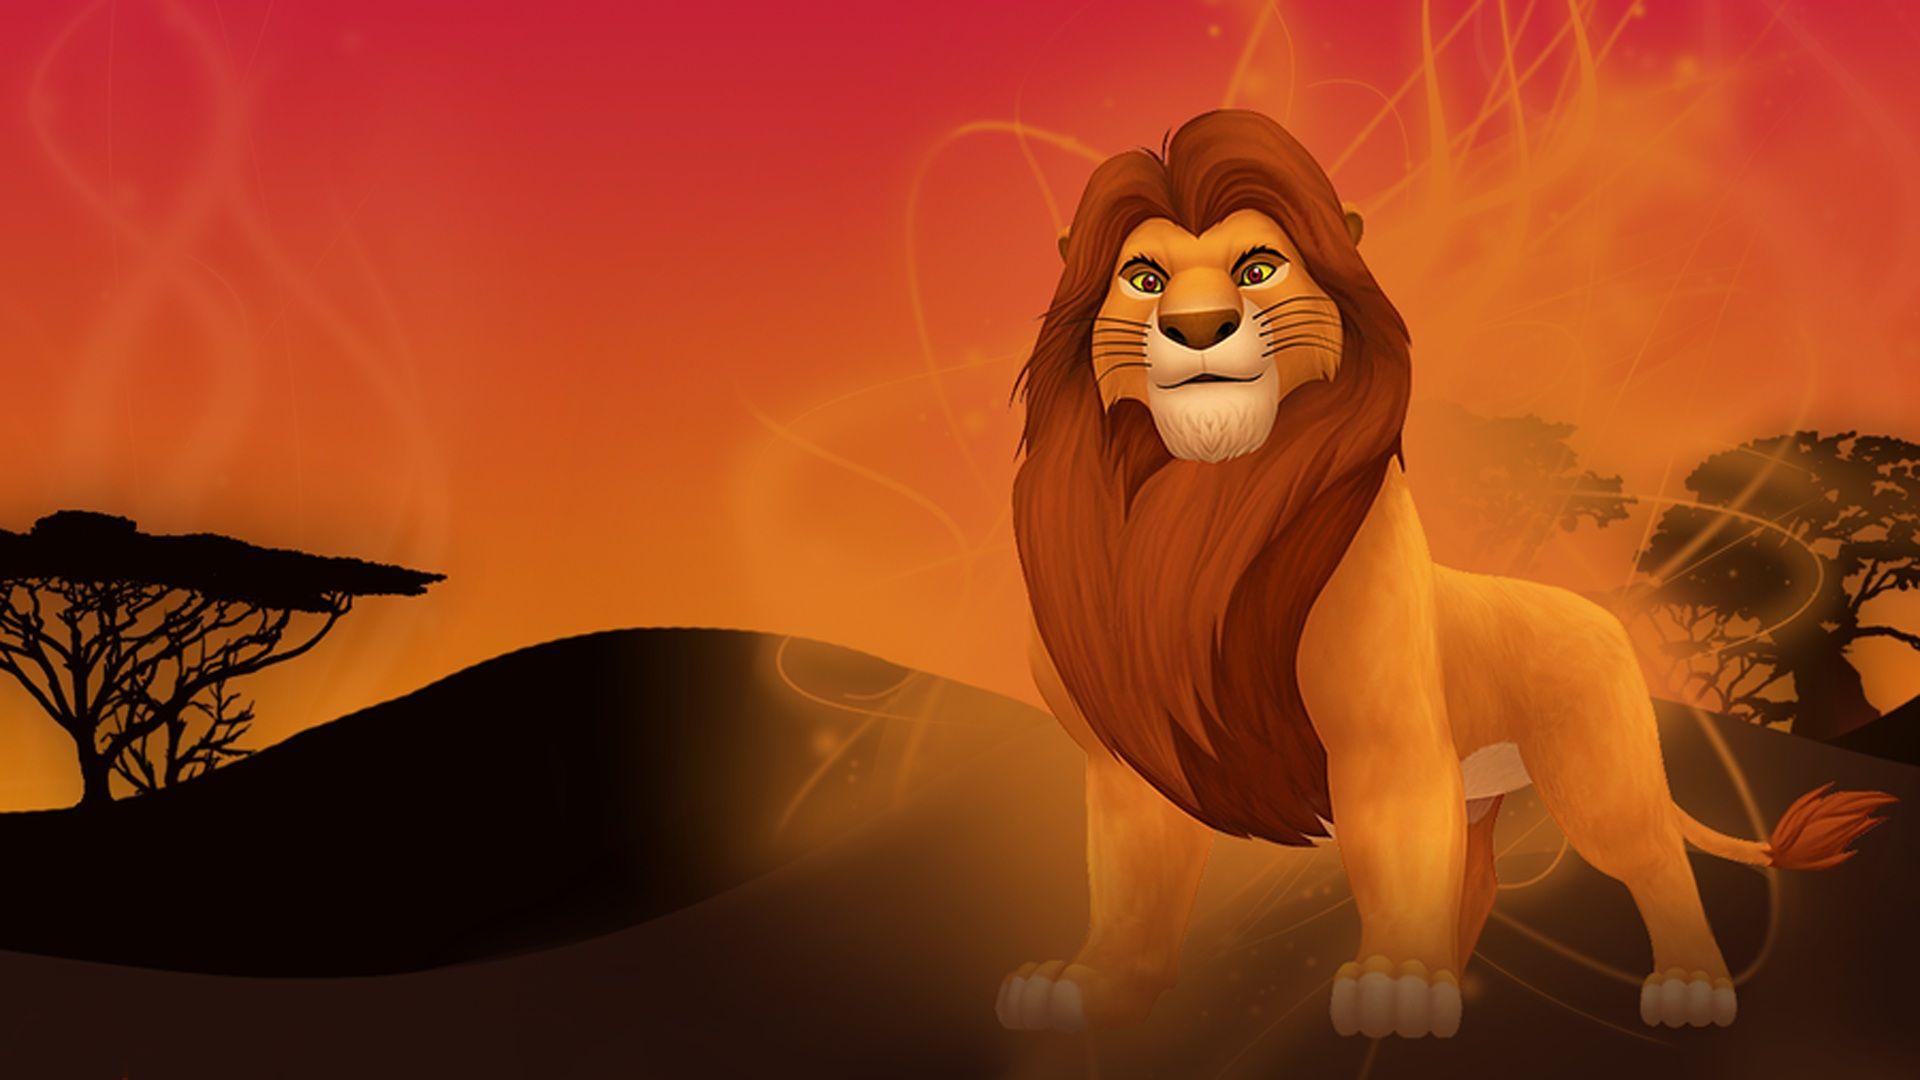 The Lion King Images Mufasa S Ghost Hd Wallpaper And Background Photos ...